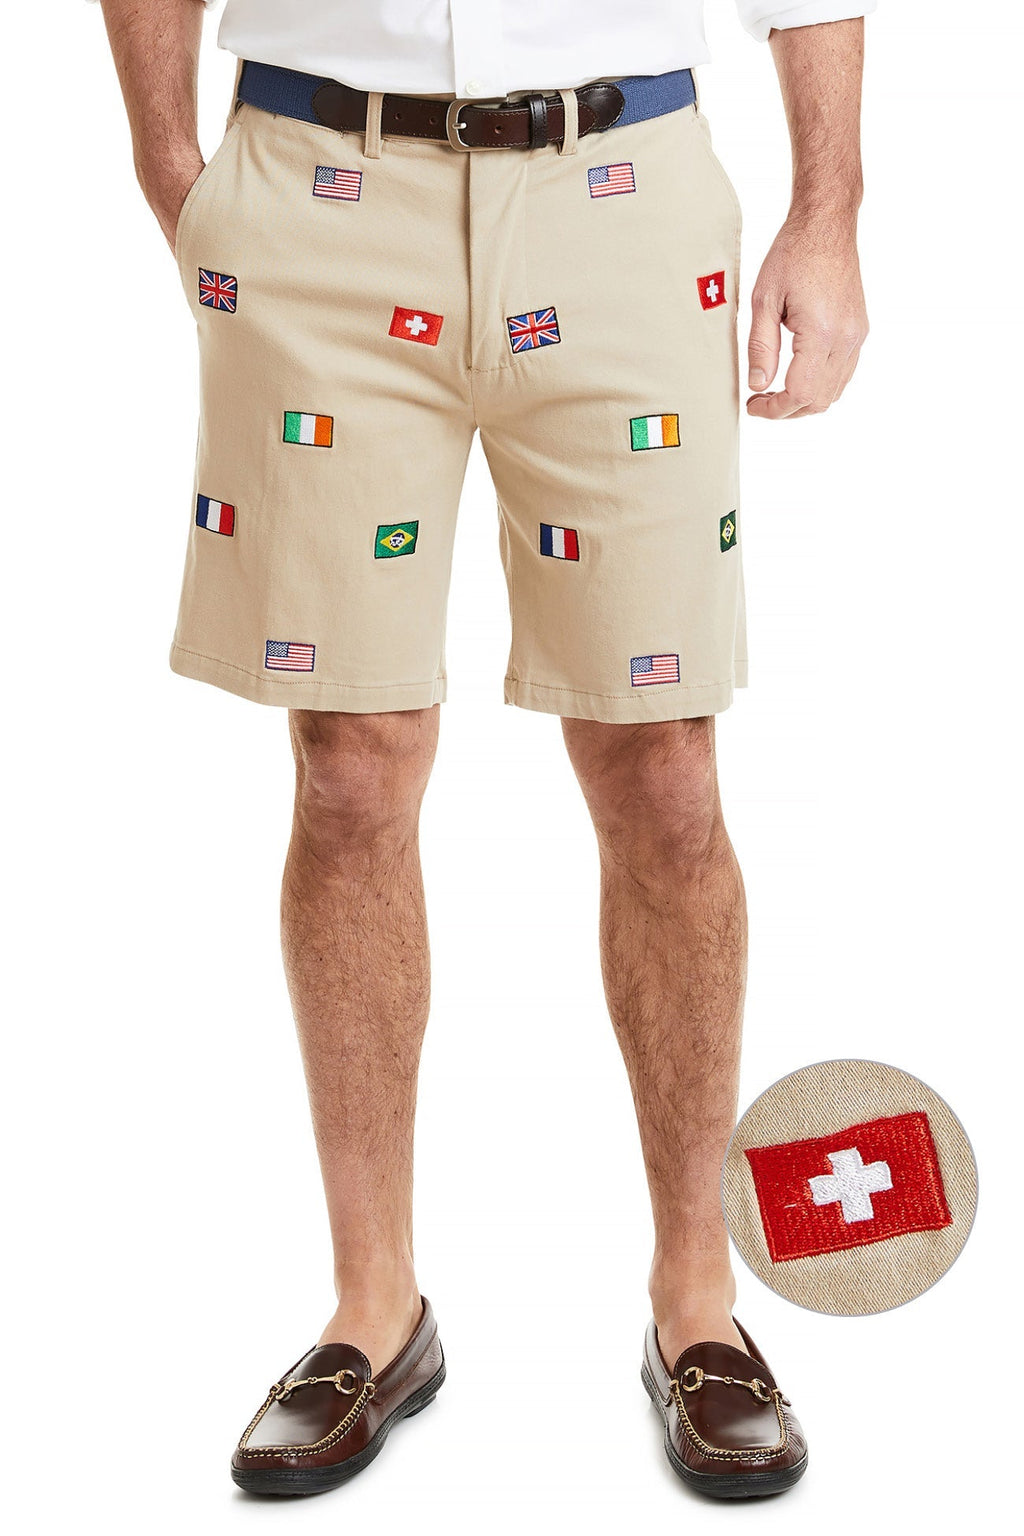 Cisco Short Stretch Twill Khaki with World Cup MENS EMBROIDERED SHORTS Castaway Nantucket Island